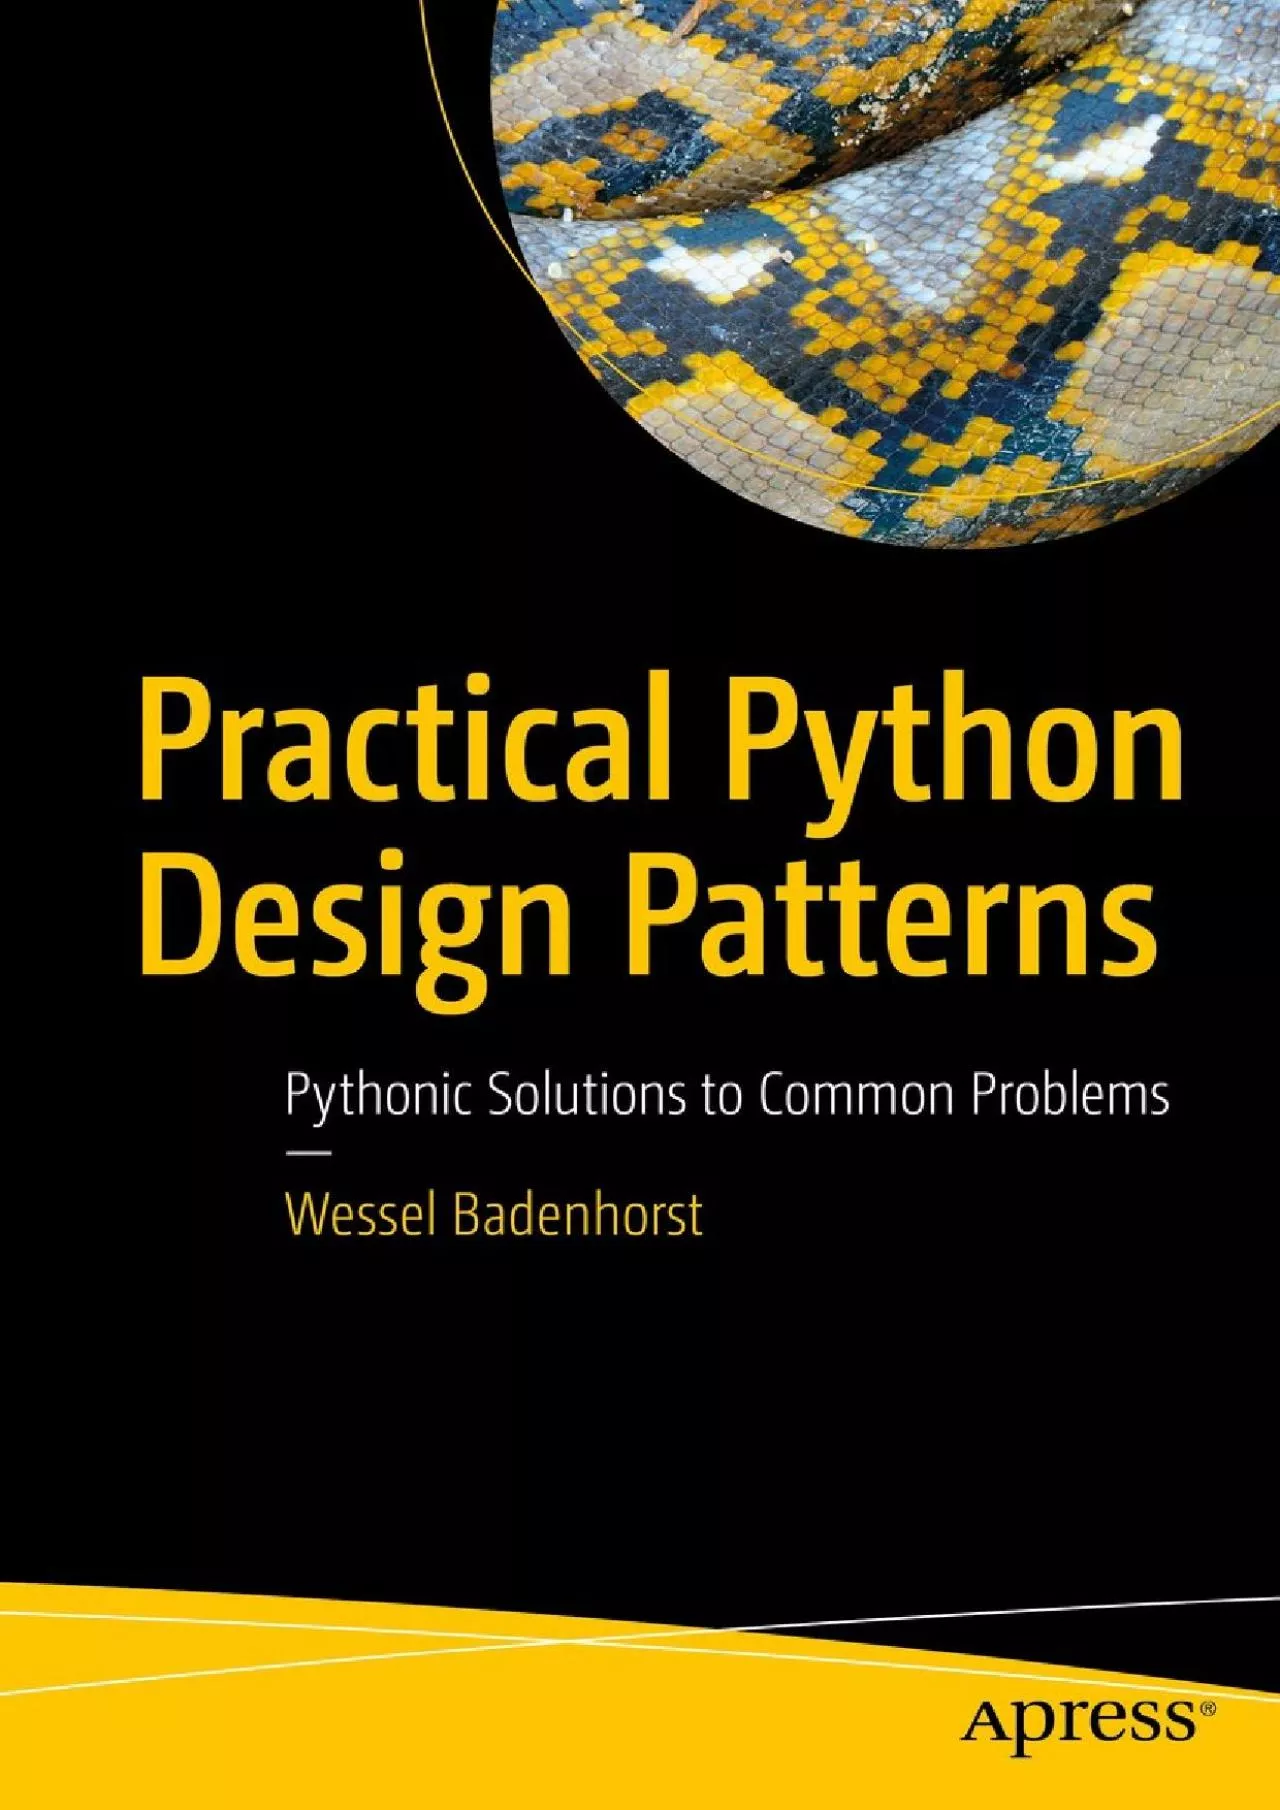 [BEST]-Practical Python Design Patterns Pythonic Solutions to Common Problems